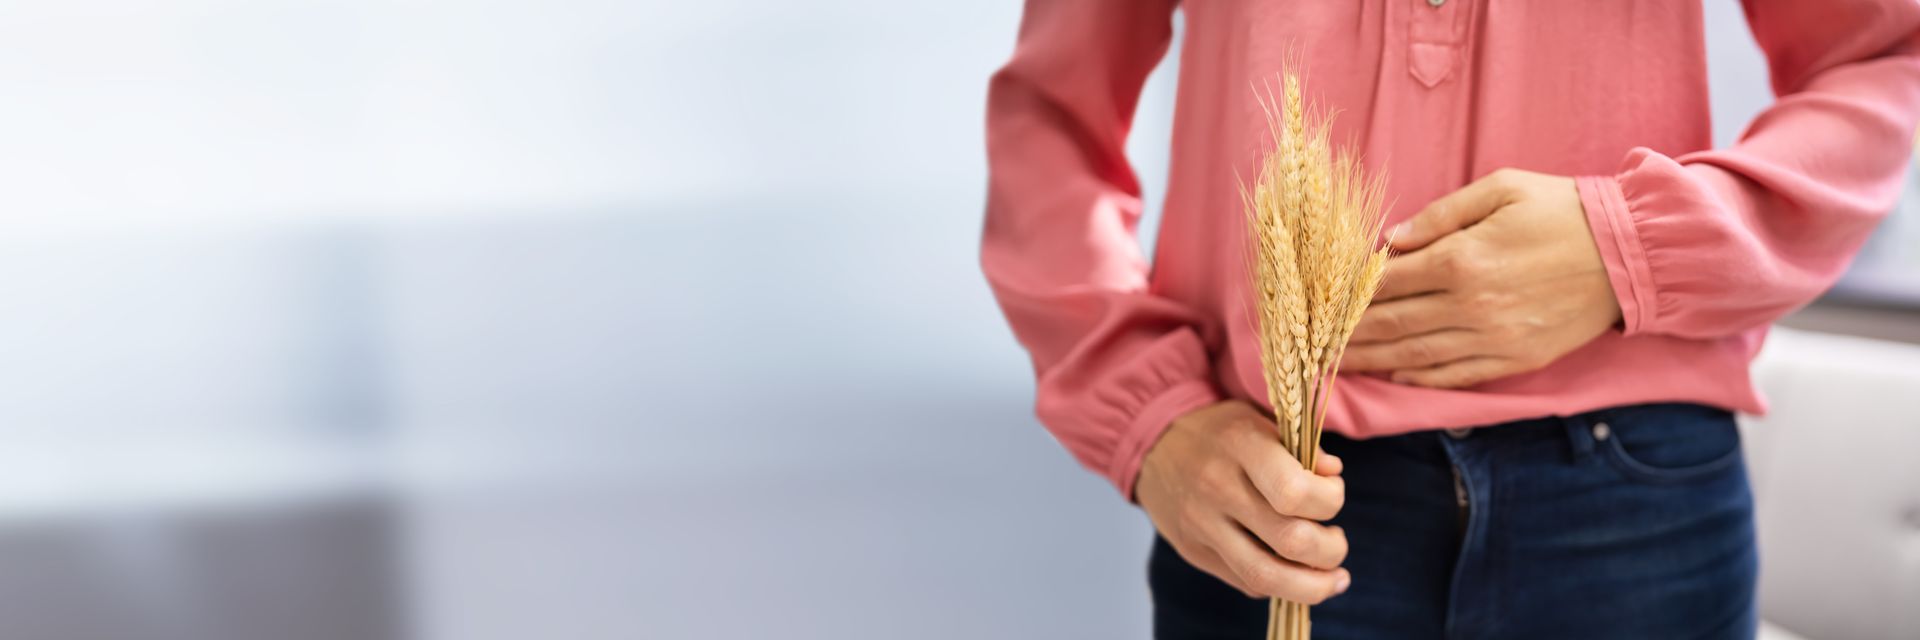 The Signs, Symptoms, and Treatment of Celiac Disease